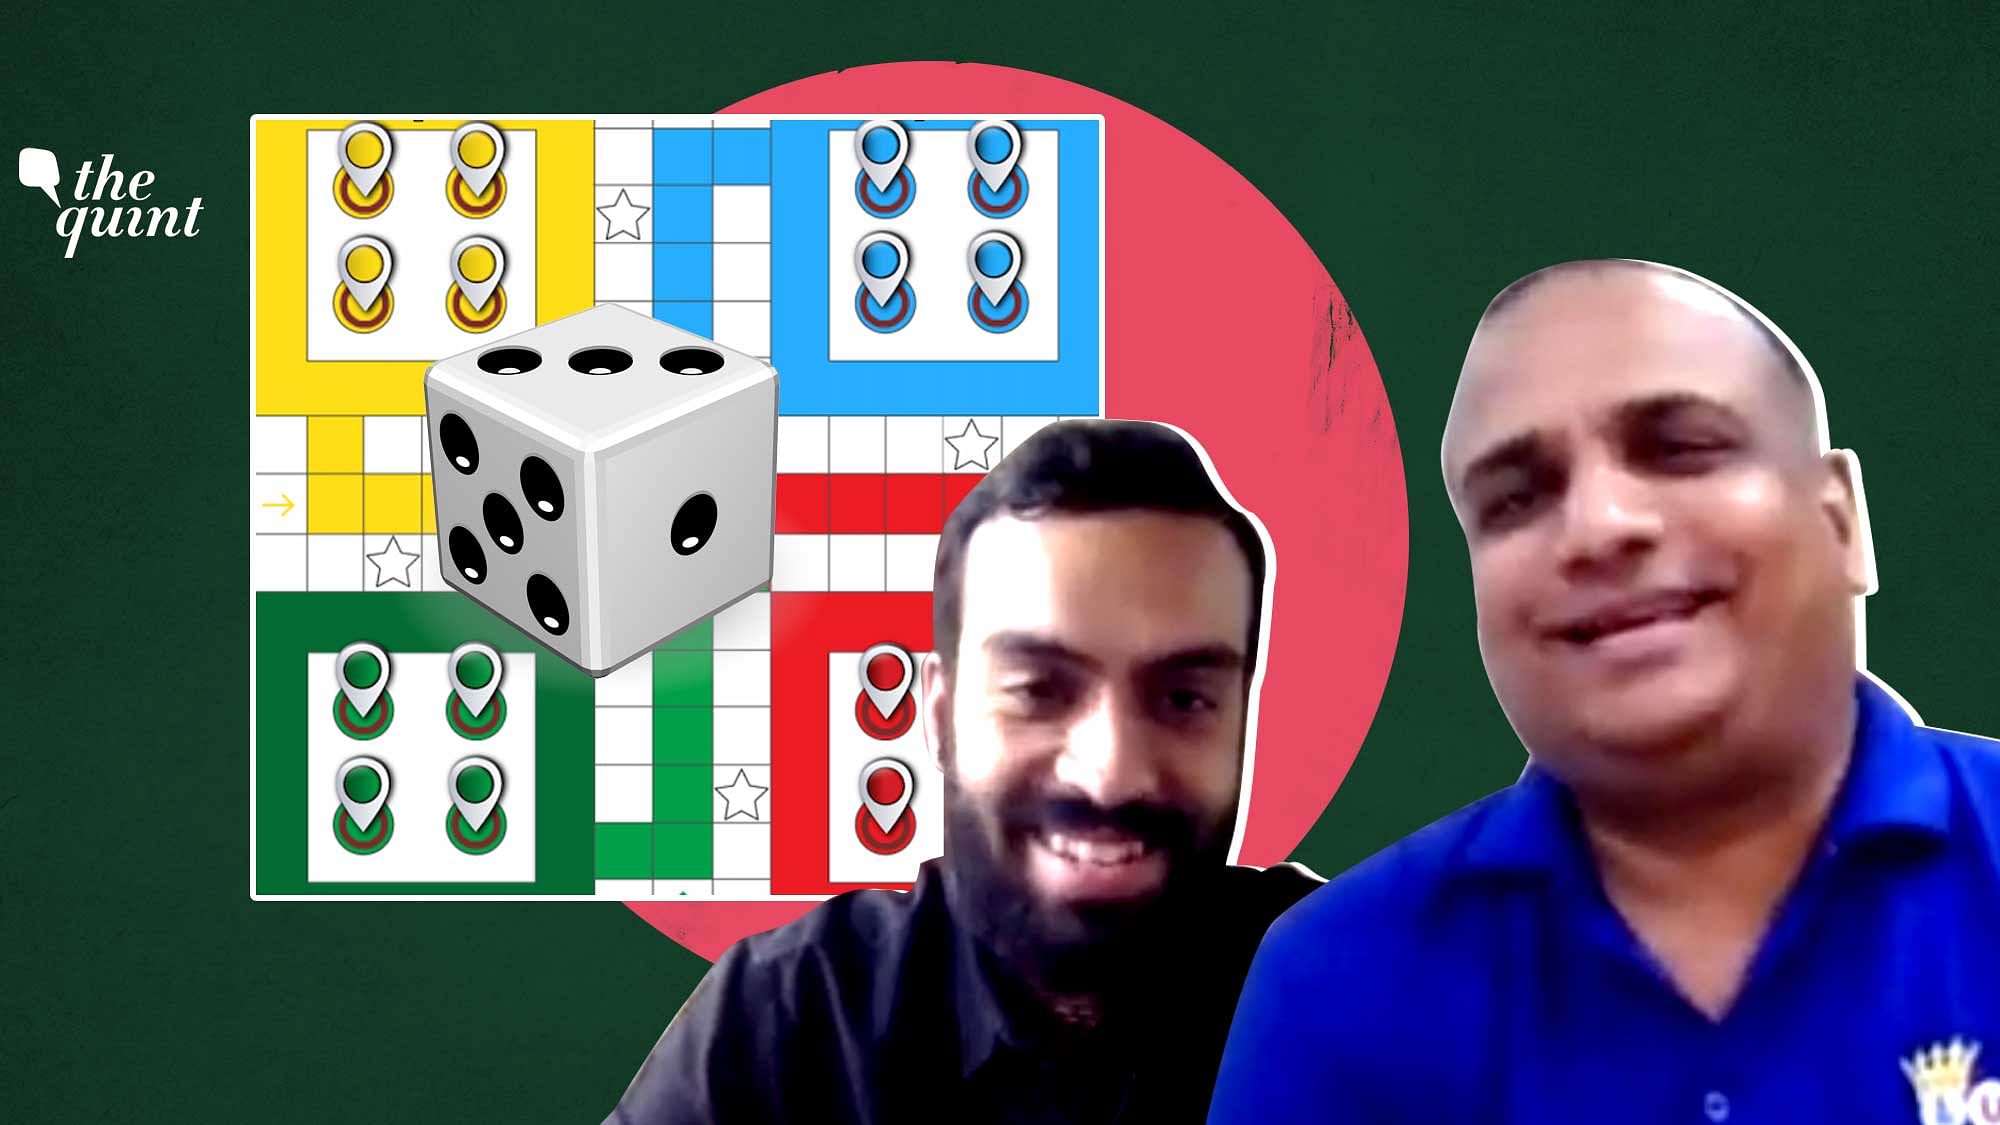 Ludo king  A winner: How Ludo became the king of games during the pandemic